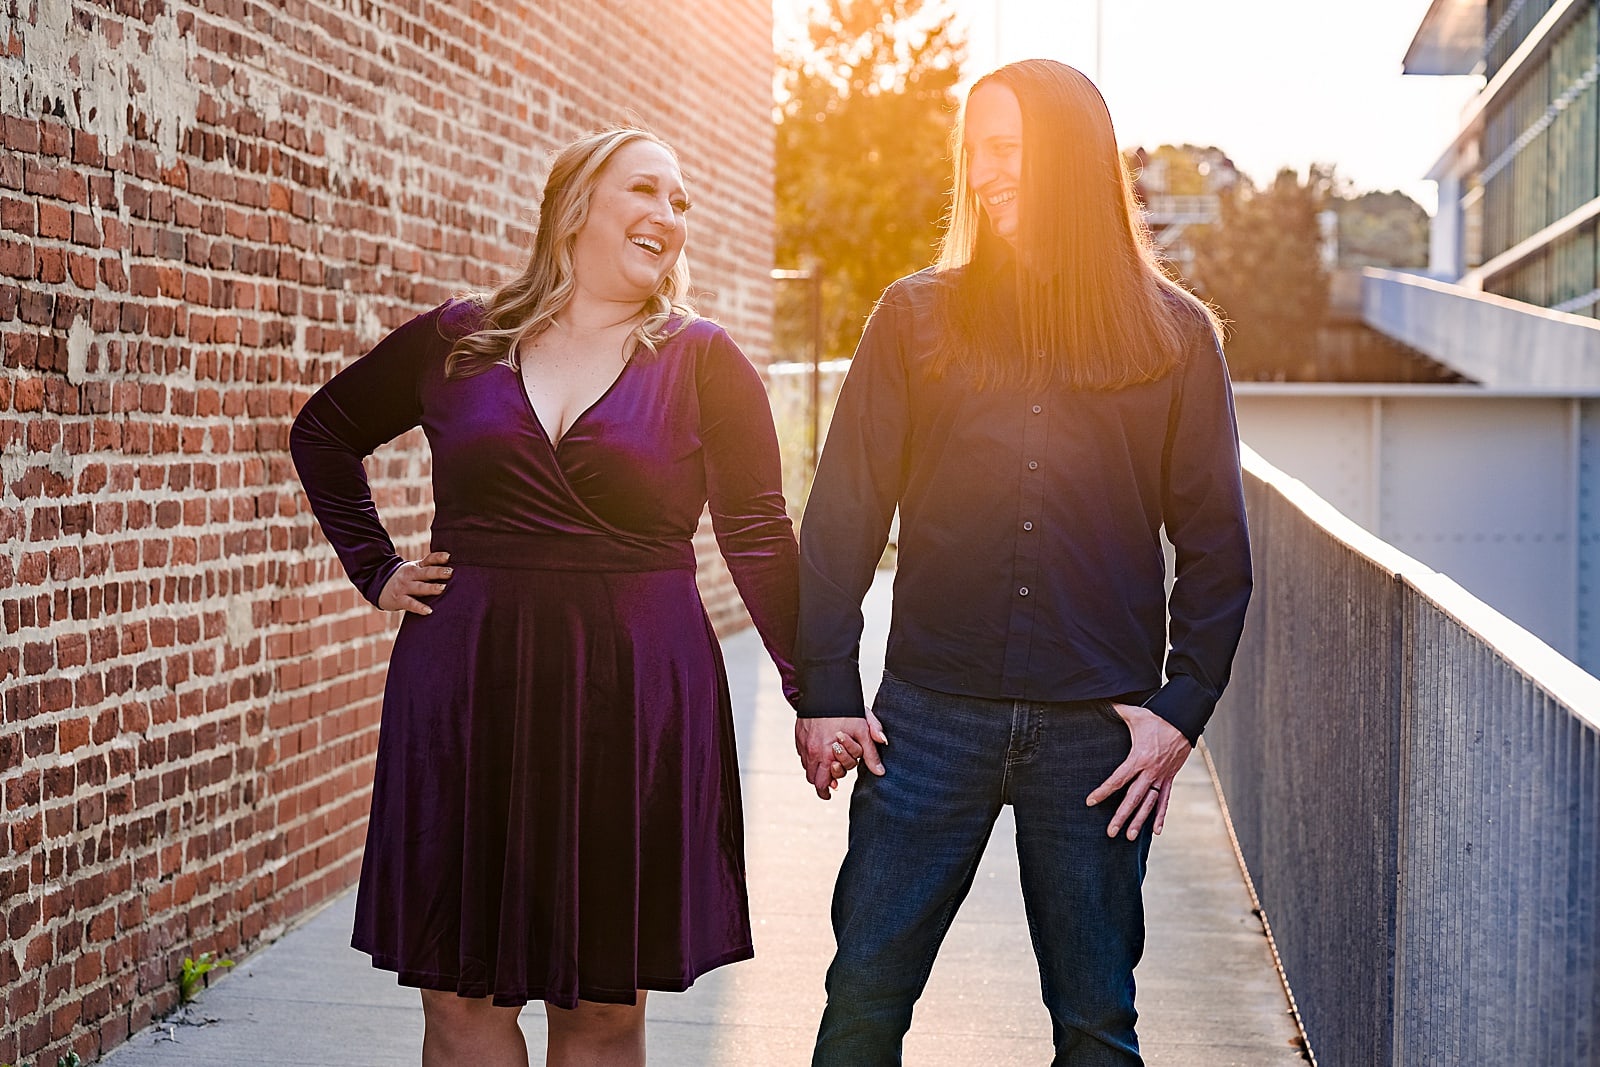 Raleigh warehouse district engagement photos